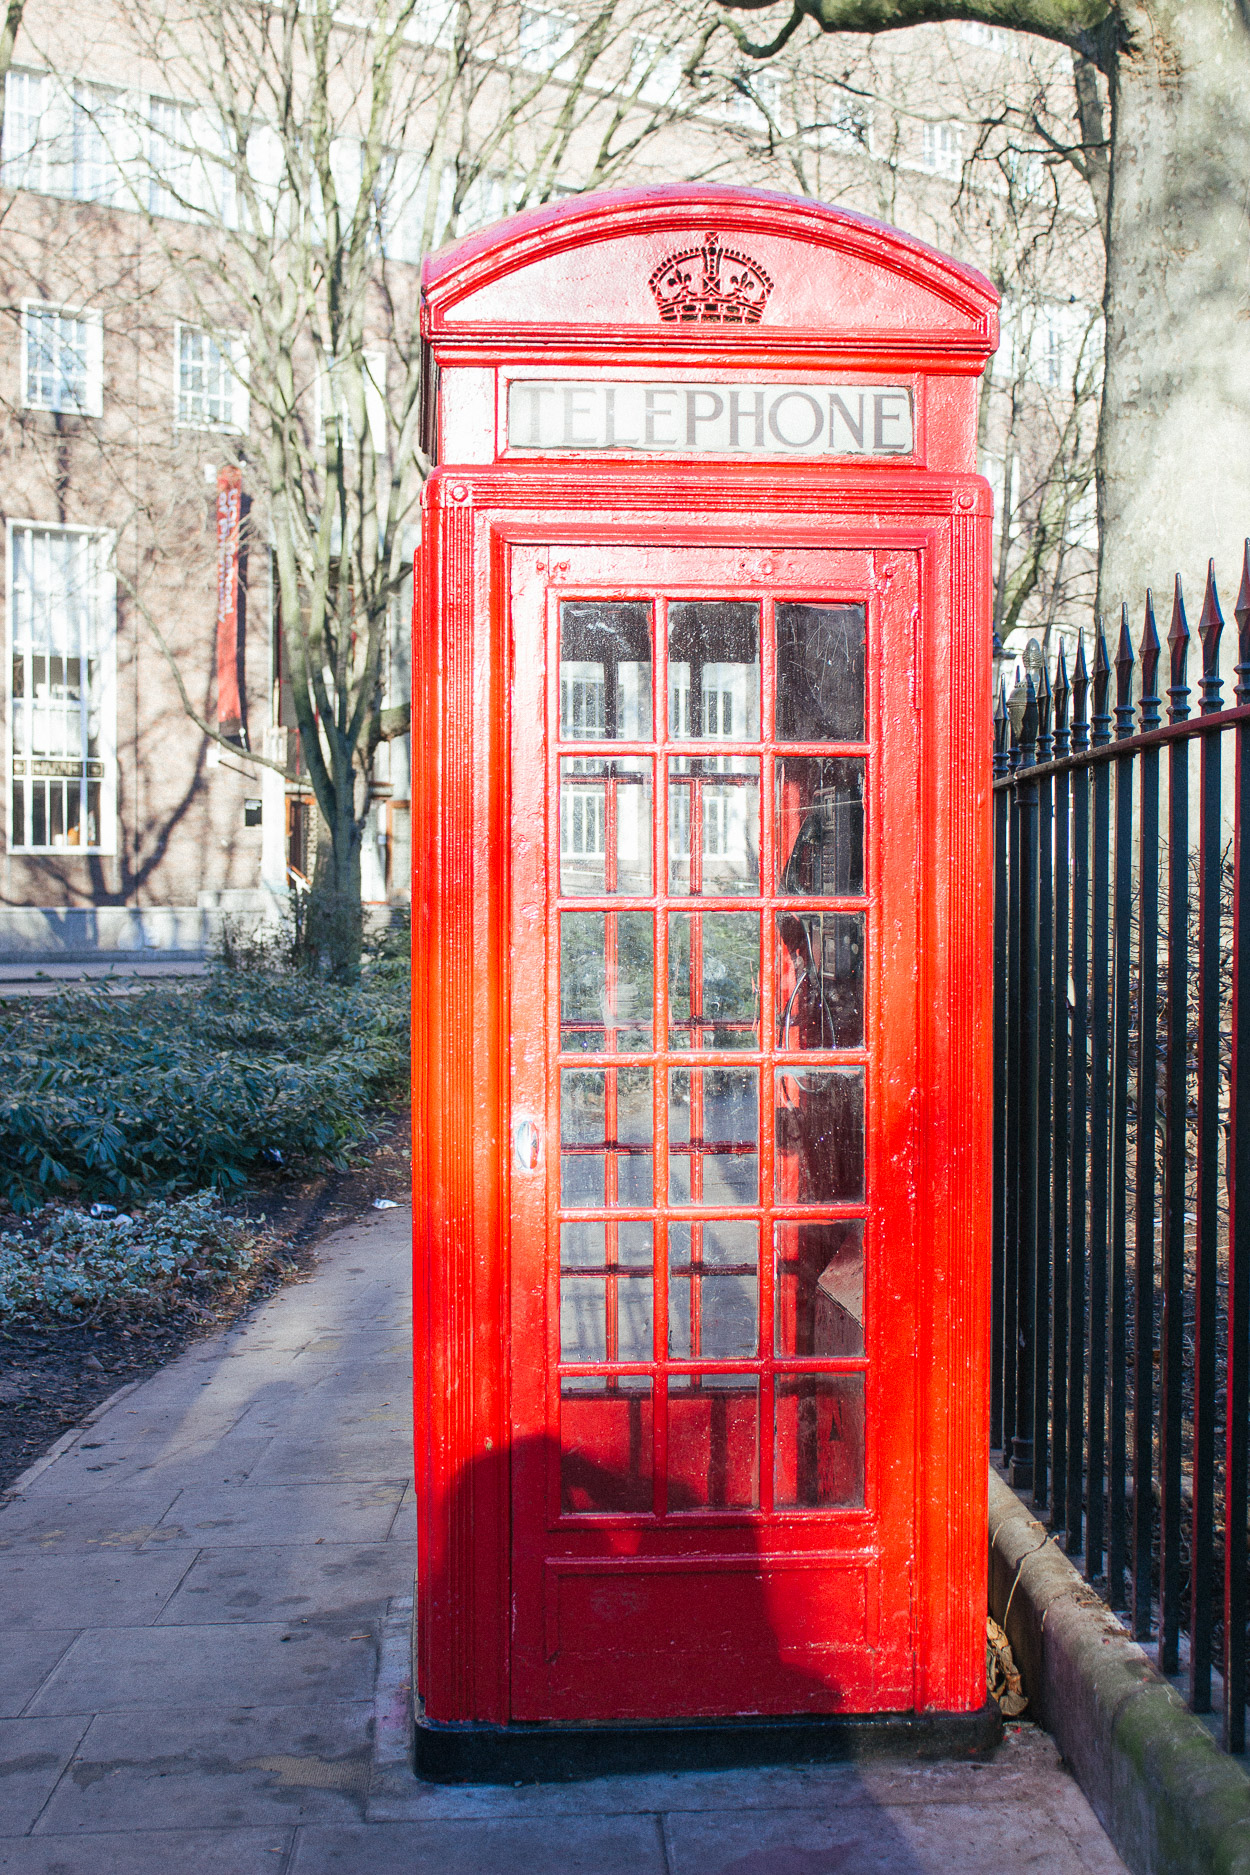 london, london telephone booth, london telephone, london red telephone booth